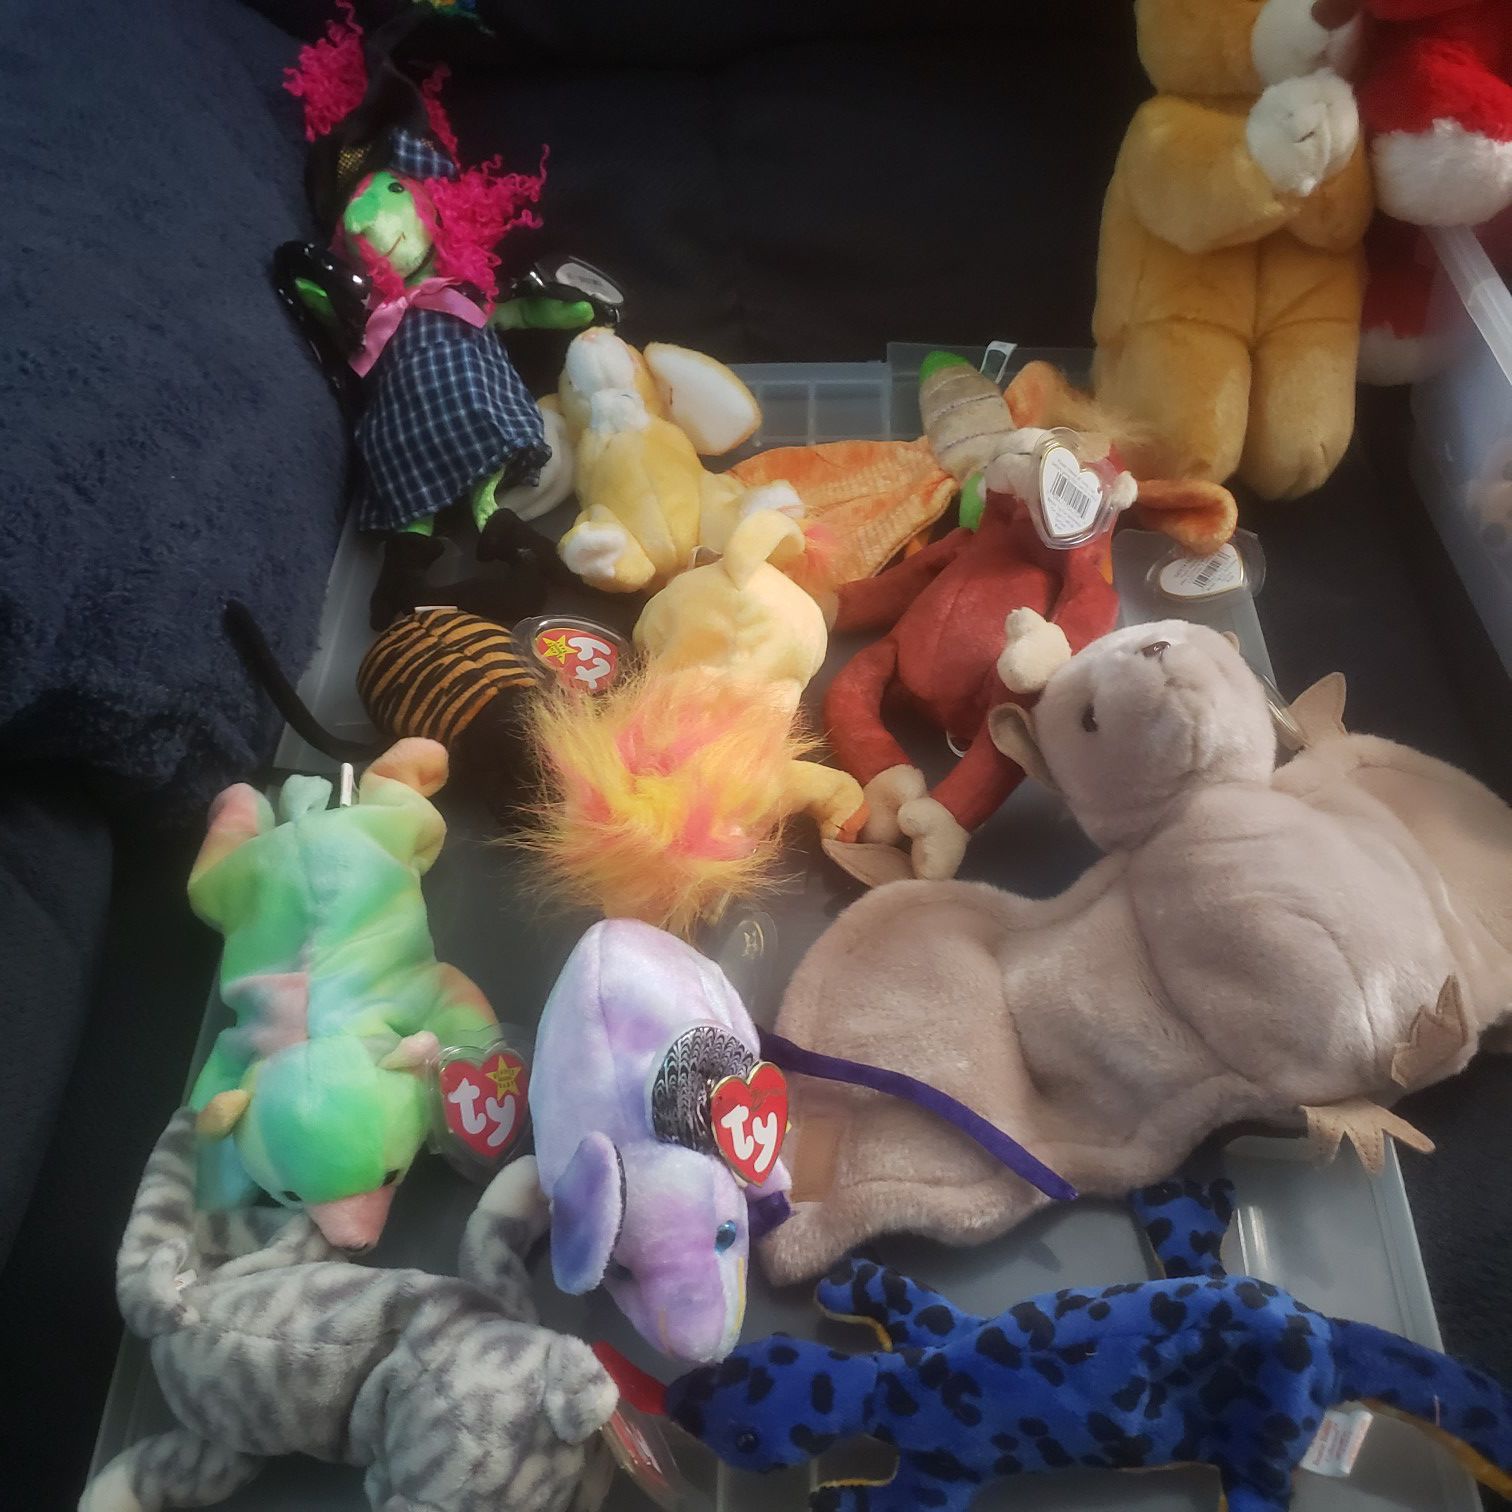 Over 30 small and large beanie babies